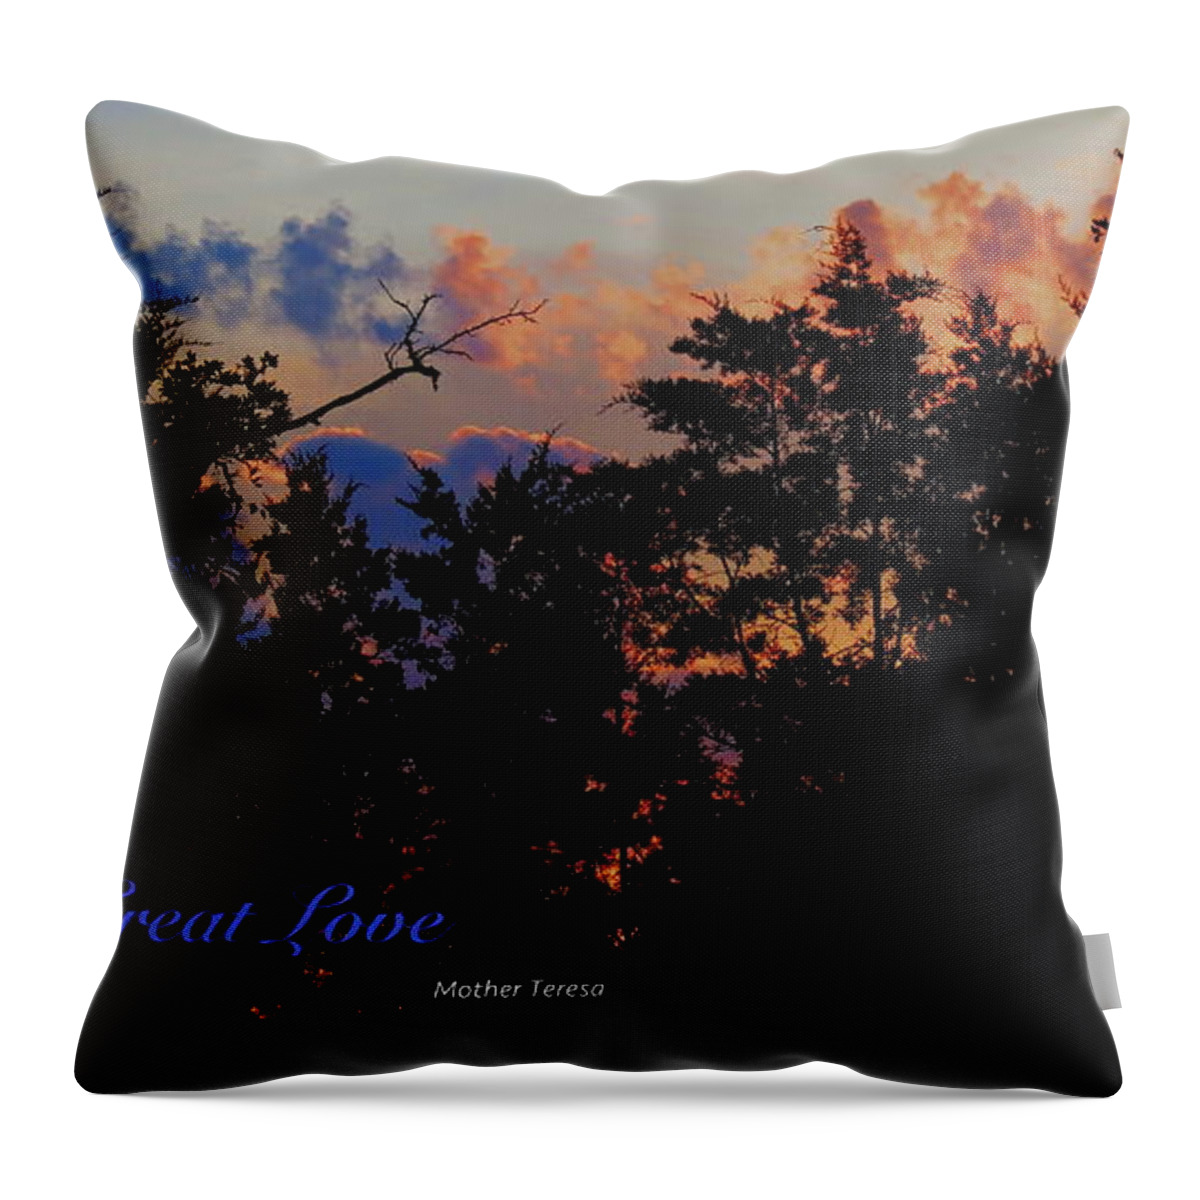  Throw Pillow featuring the photograph Small Counts by David Norman